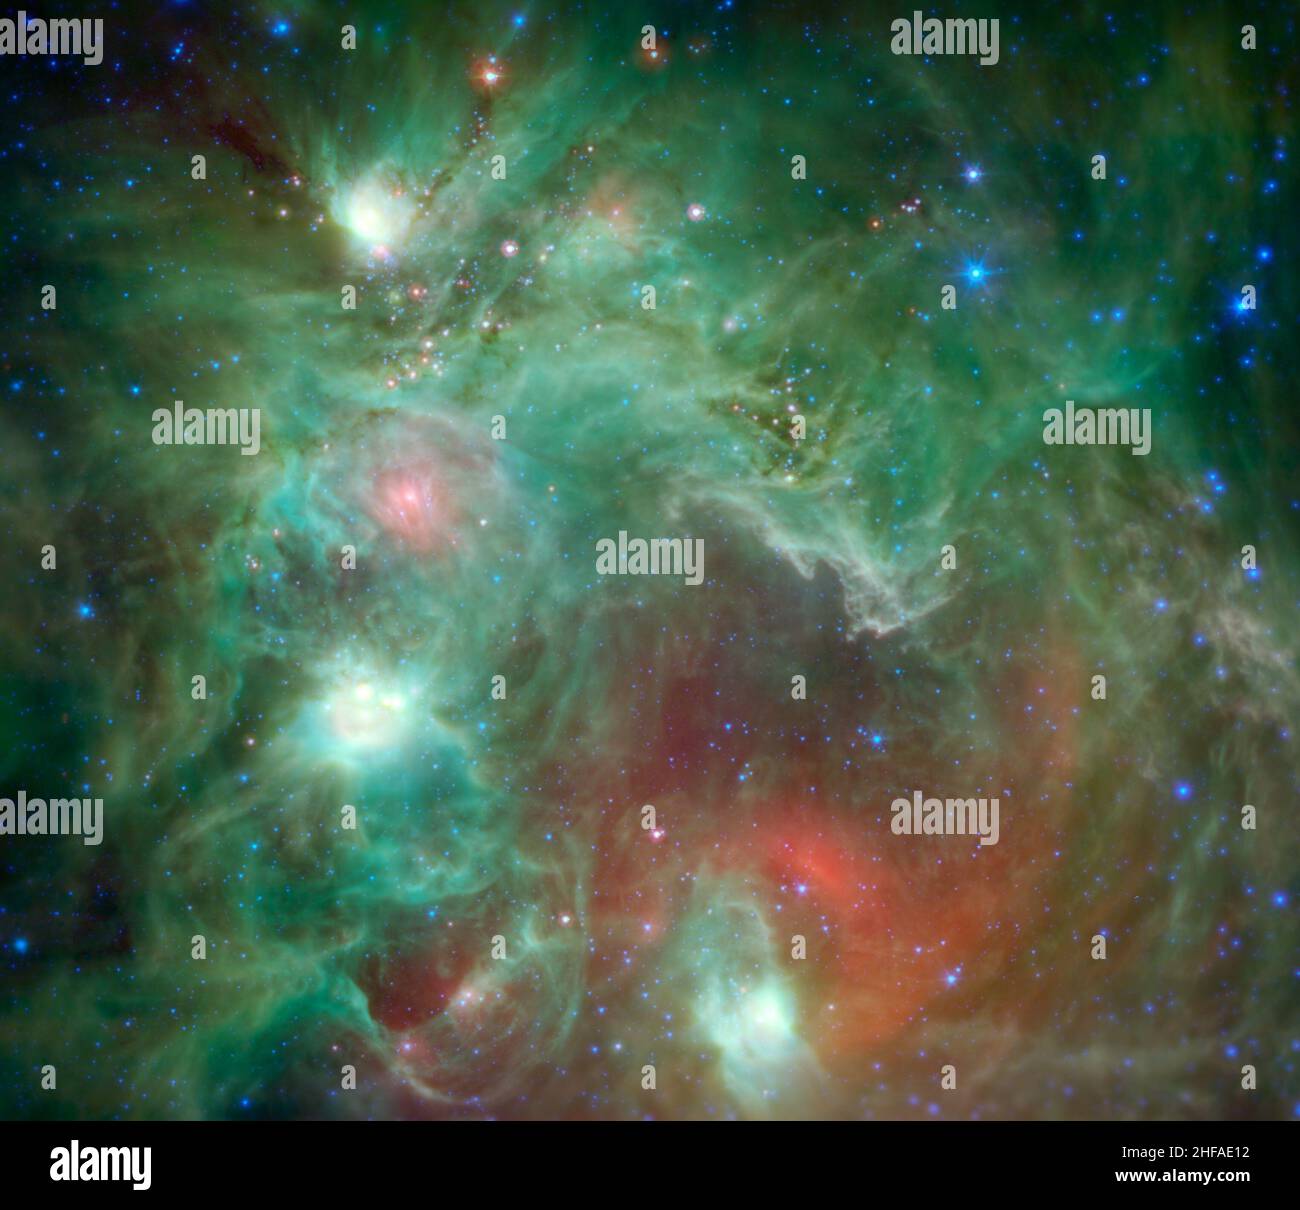 Space. 9th Feb, 2015. Scores of baby stars shrouded by dust are revealed in this infrared image of the star-forming region NGC 2174, as seen by NASA's Spitzer Space Telescope. In this image first published in 2015, infrared wavelengths have been assigned visible colors we see with our eyes. Light with a wavelength of 3.5 microns is shown in blue, 8.0 microns is green, and 24 microns in red. The greens show the organic molecules in the dust clouds, illuminated by starlight. Reds are caused by the thermal radiation emitted from the very hottest areas of dust. (Credit Image: © NASA/ZUMA Pres Stock Photo